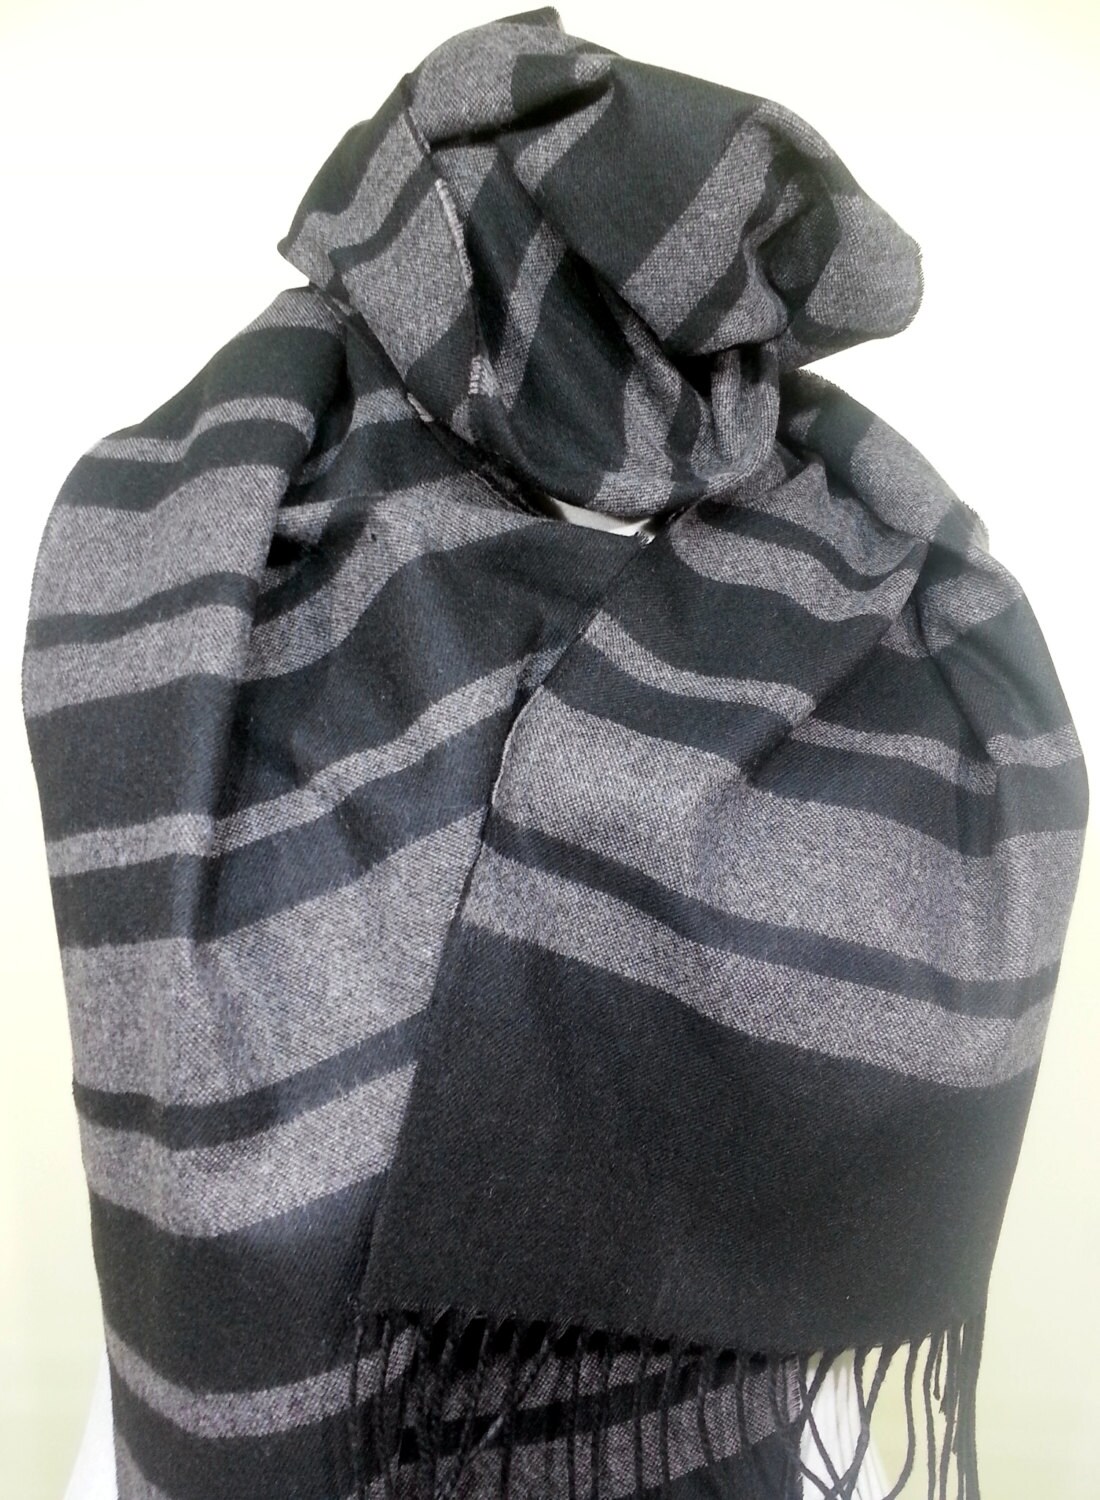 Black and Gray Men's Scarf Men's Scarf Black and Gray by PeraTime